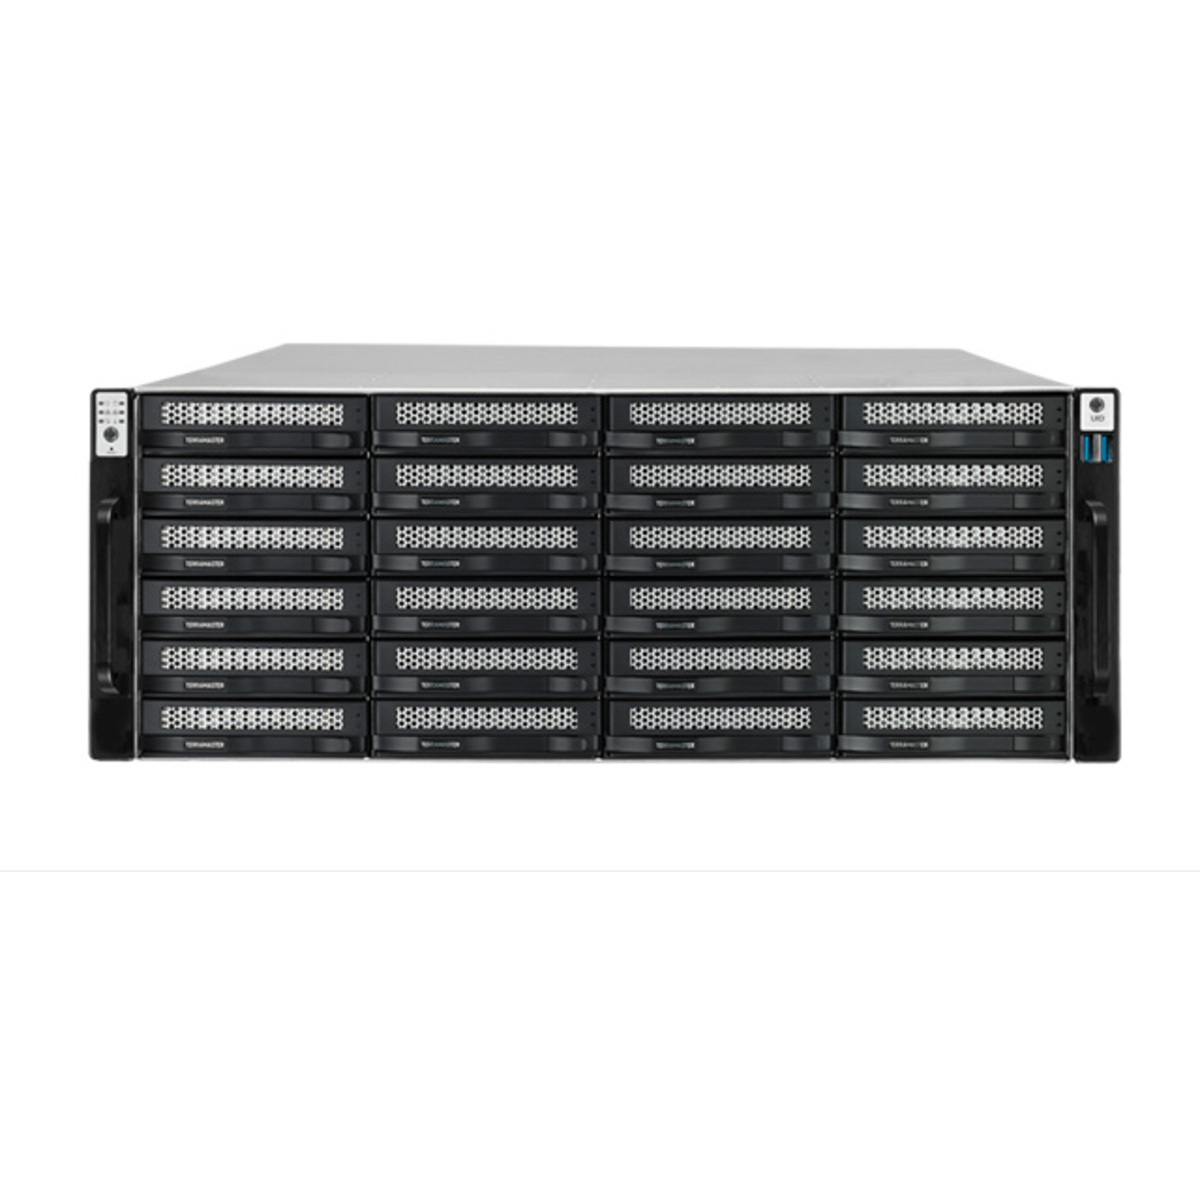 TerraMaster U24-722-2224 68tb 24-Bay RackMount Large Business / Enterprise NAS - Network Attached Storage Device 17x4tb Seagate IronWolf ST4000VN006 3.5 5400rpm SATA 6Gb/s HDD NAS Class Drives Installed - Burn-In Tested U24-722-2224